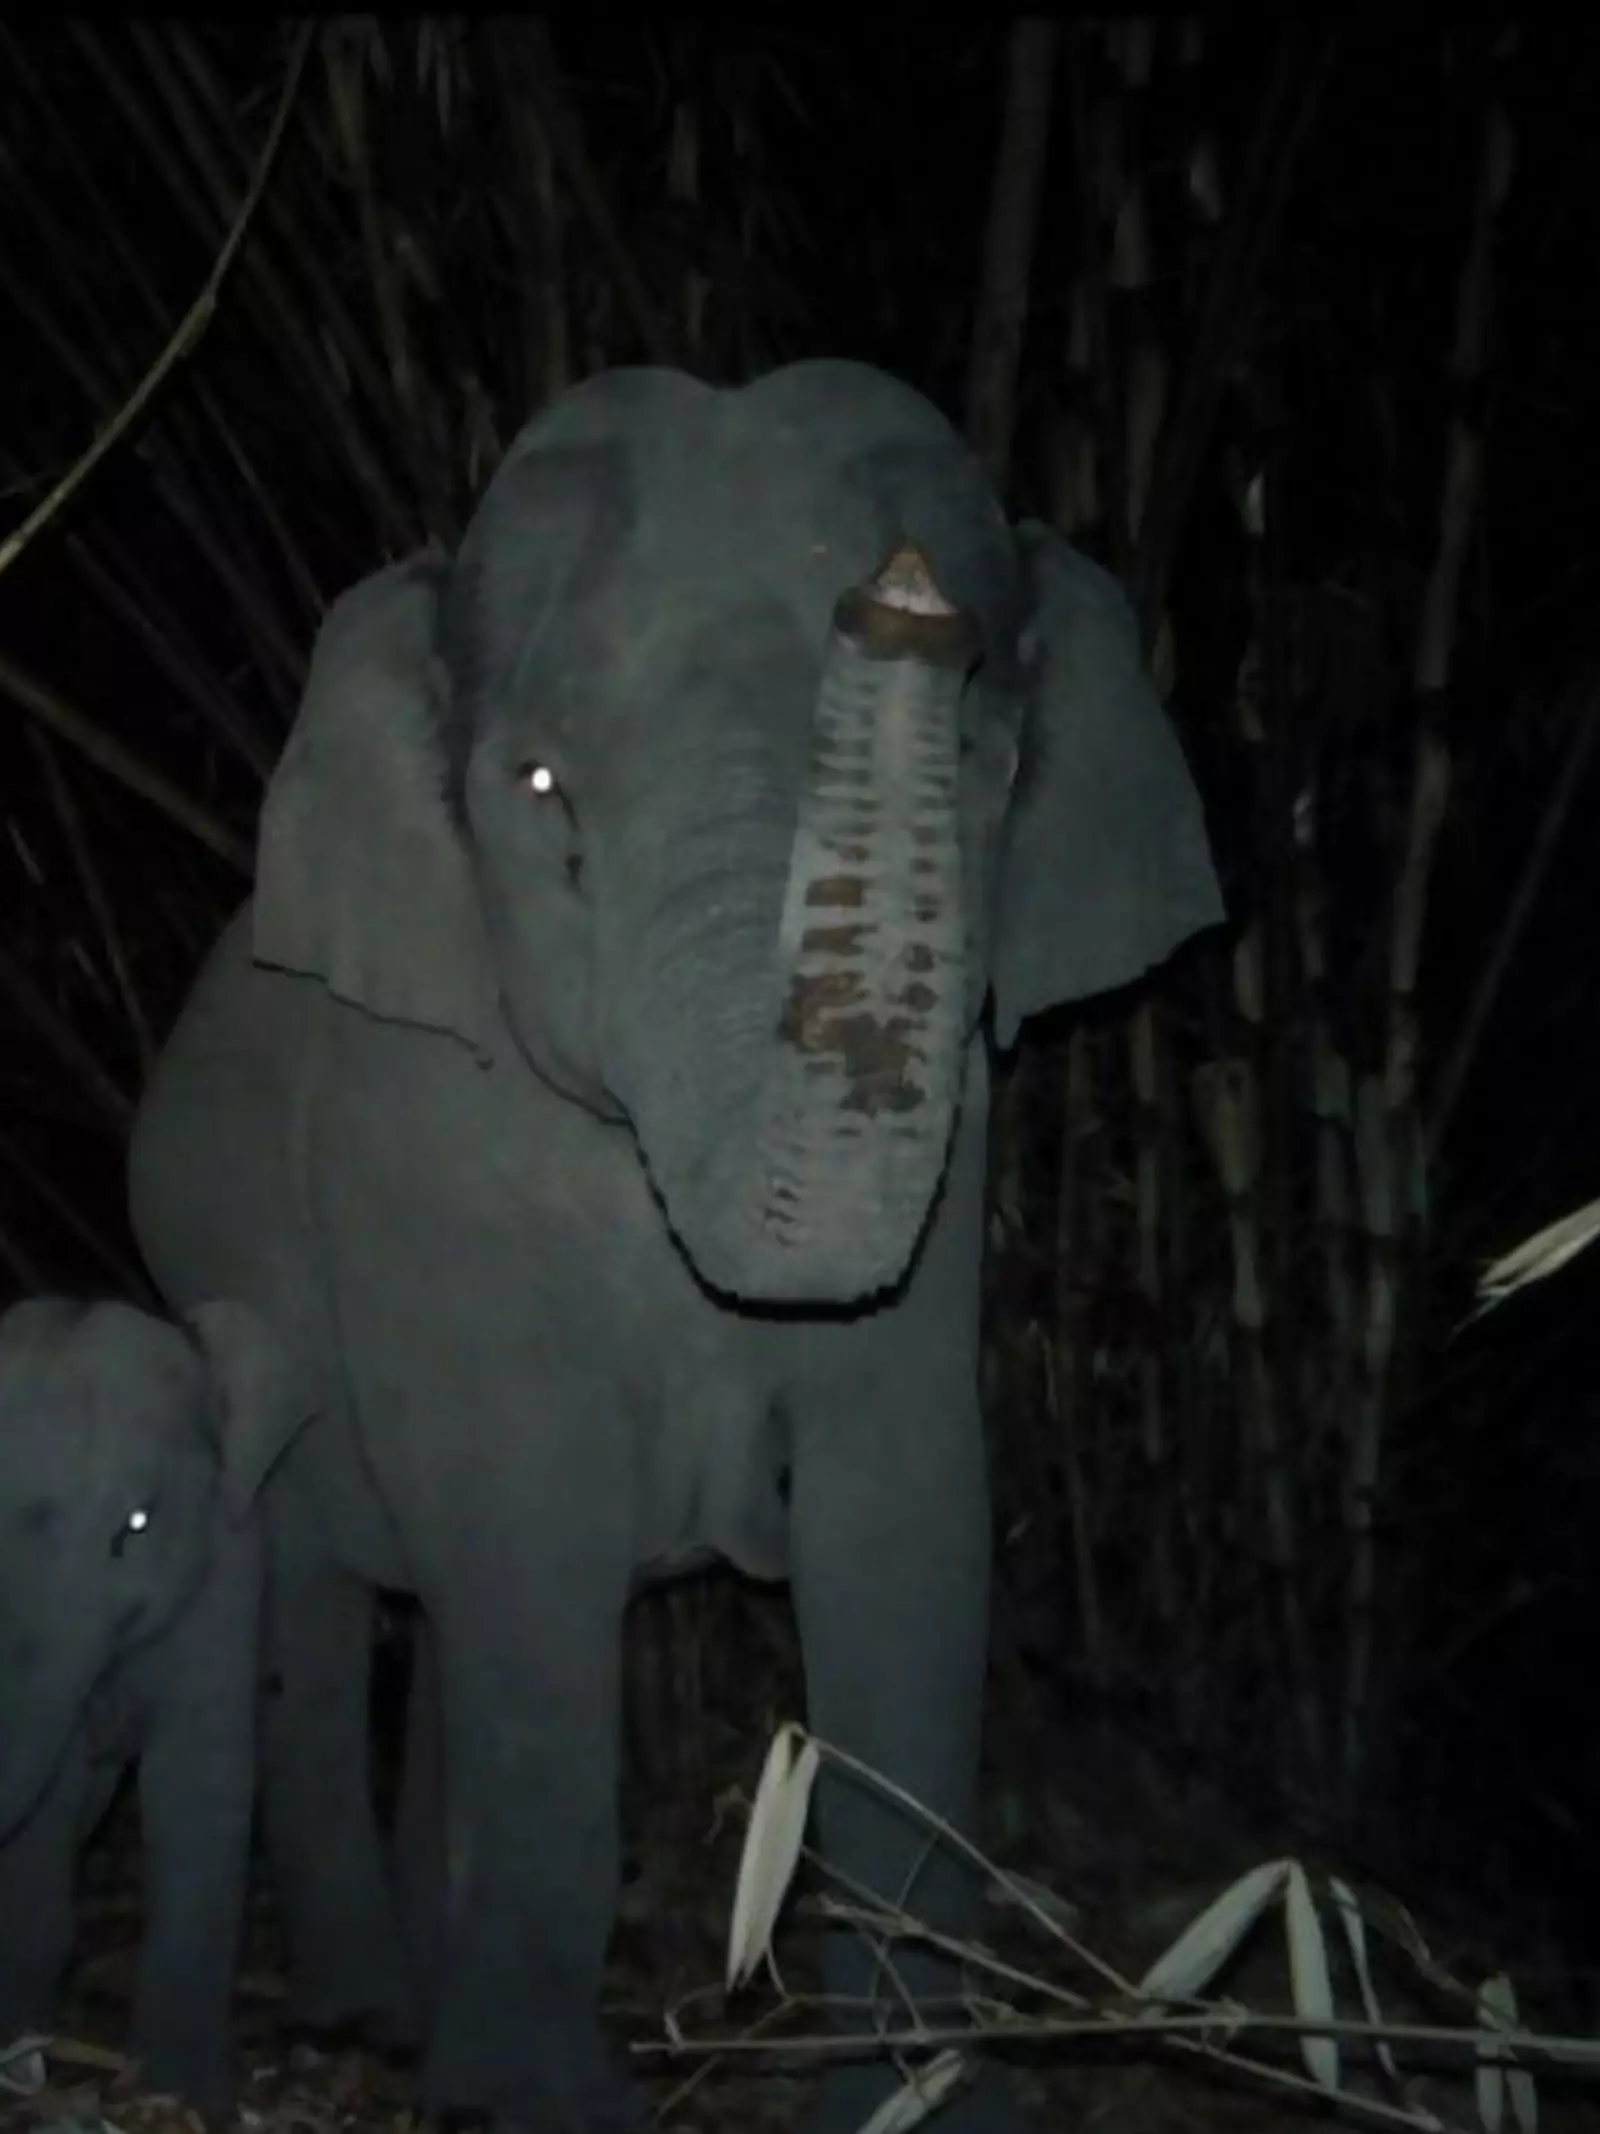 An elephant and calf in the night walking in the forest